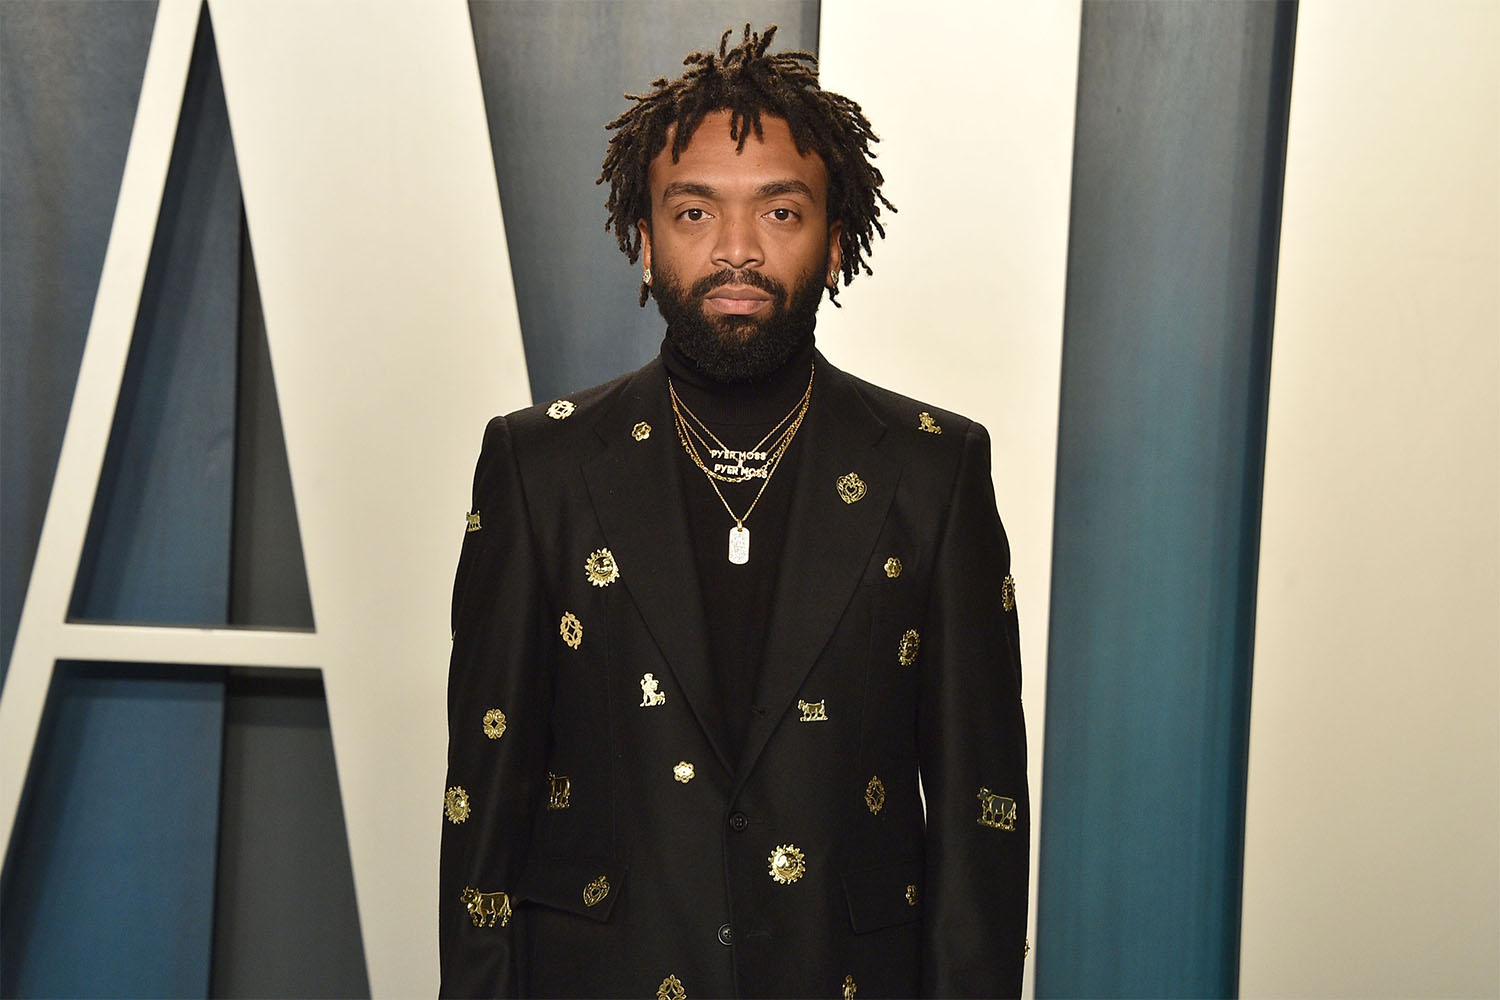 Kerby Jean-Raymond Becomes First Black U.S. Designer to Show at